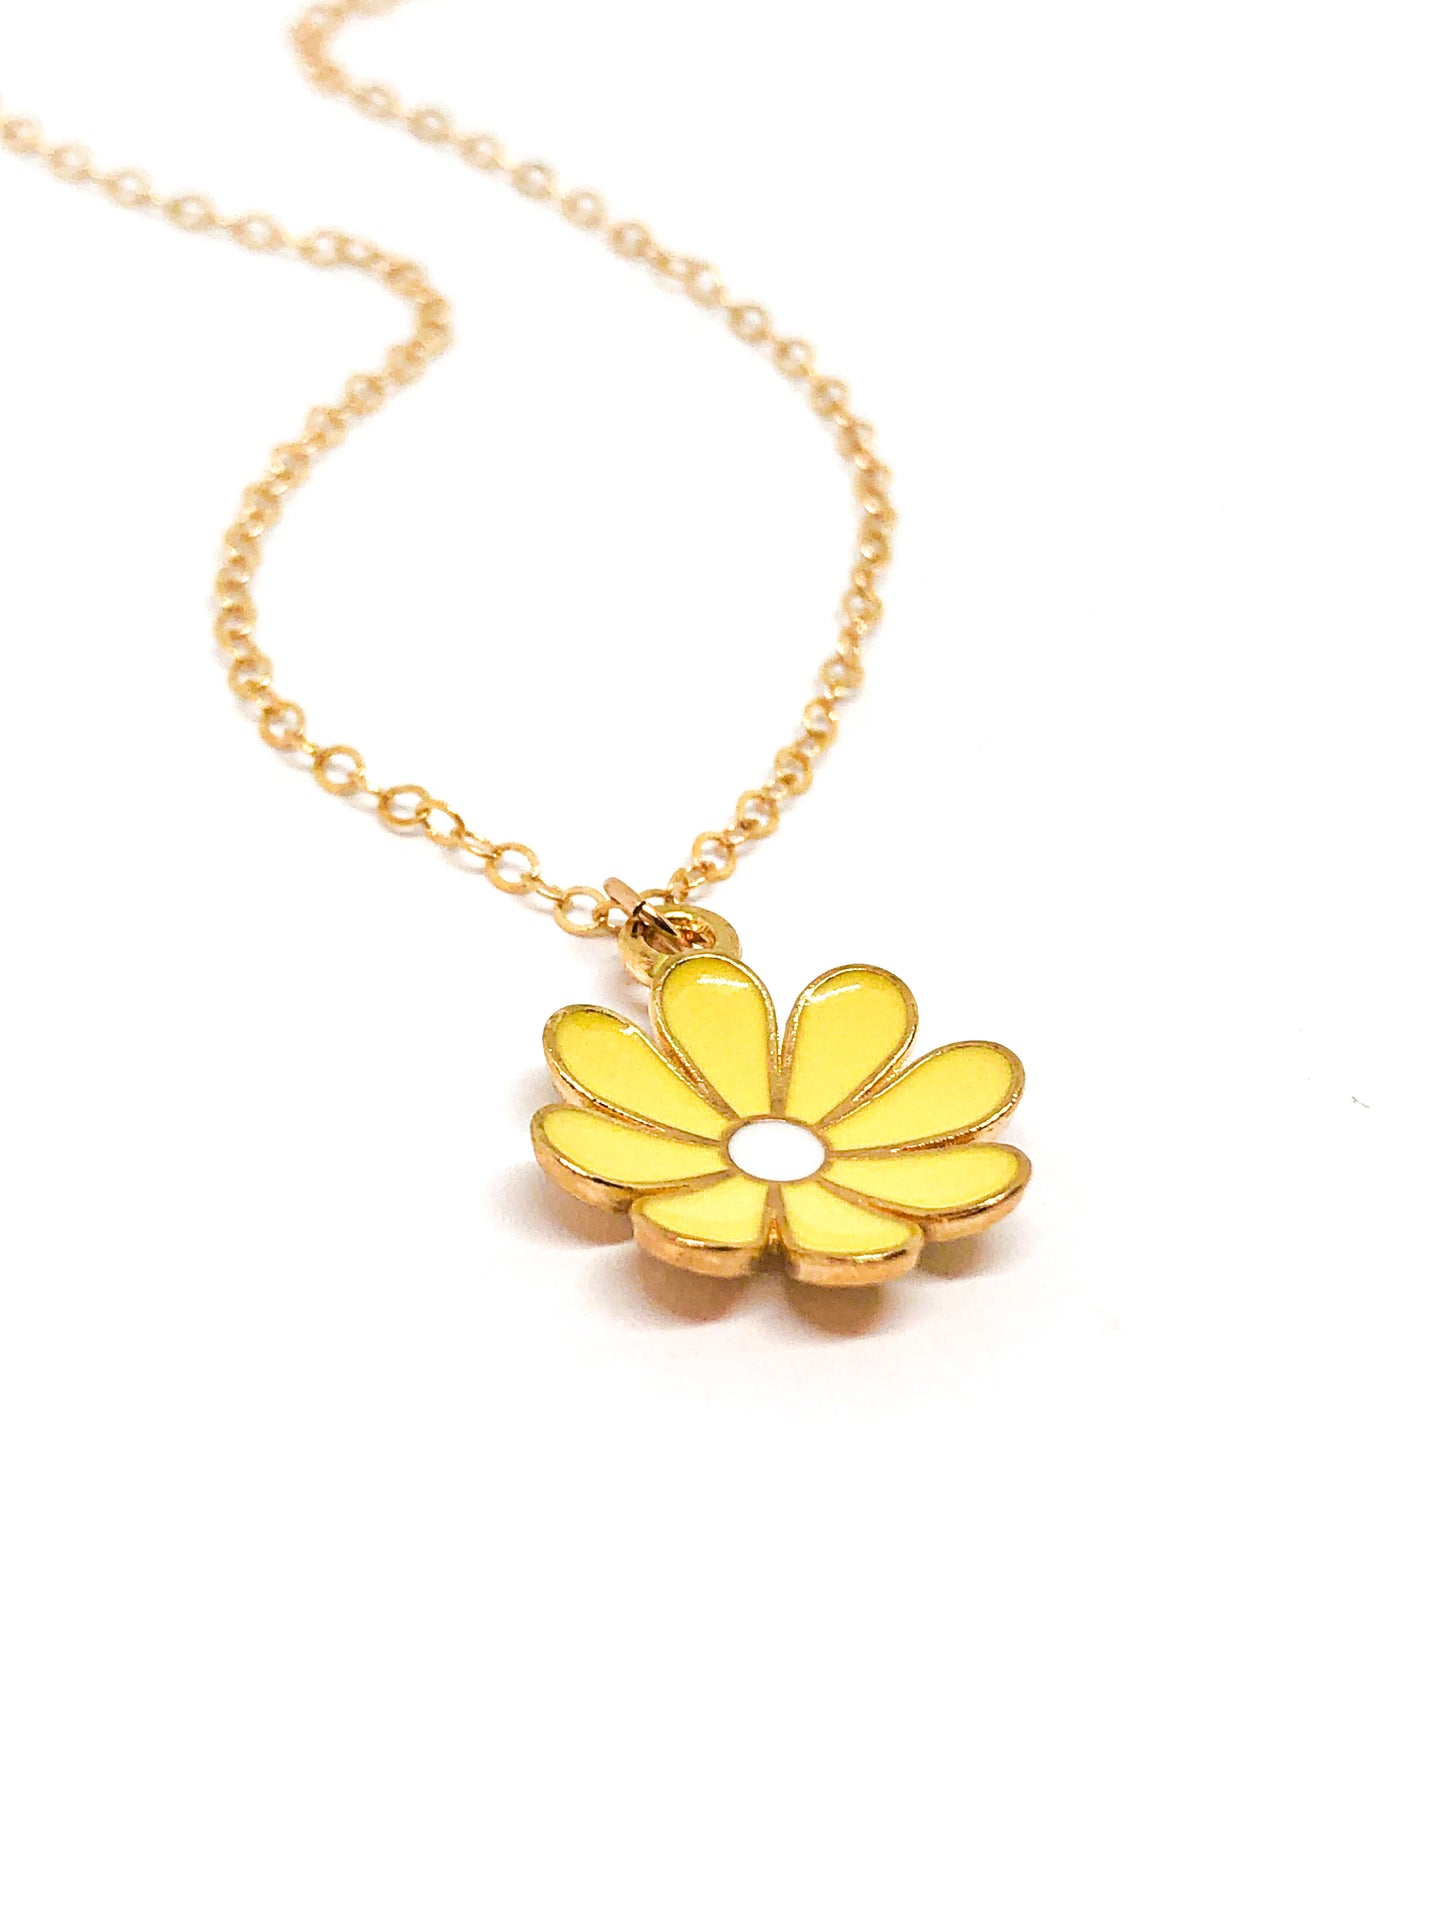 Yellow Flower necklace